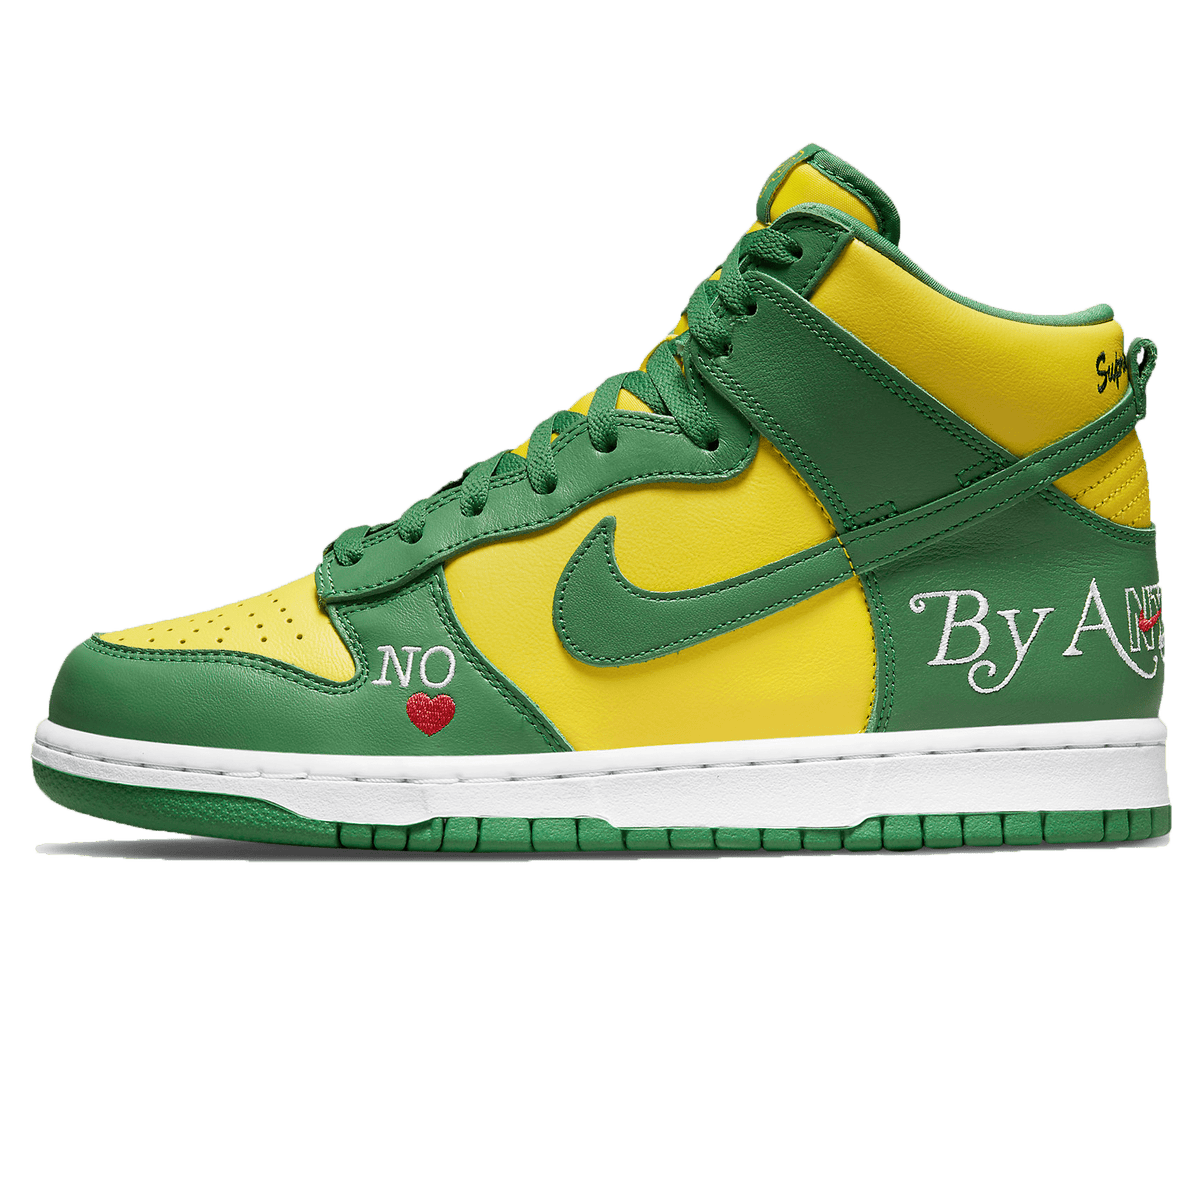 Supreme x Nike Dunk High SB 'By Any Means - Brazil' - CerbeShops